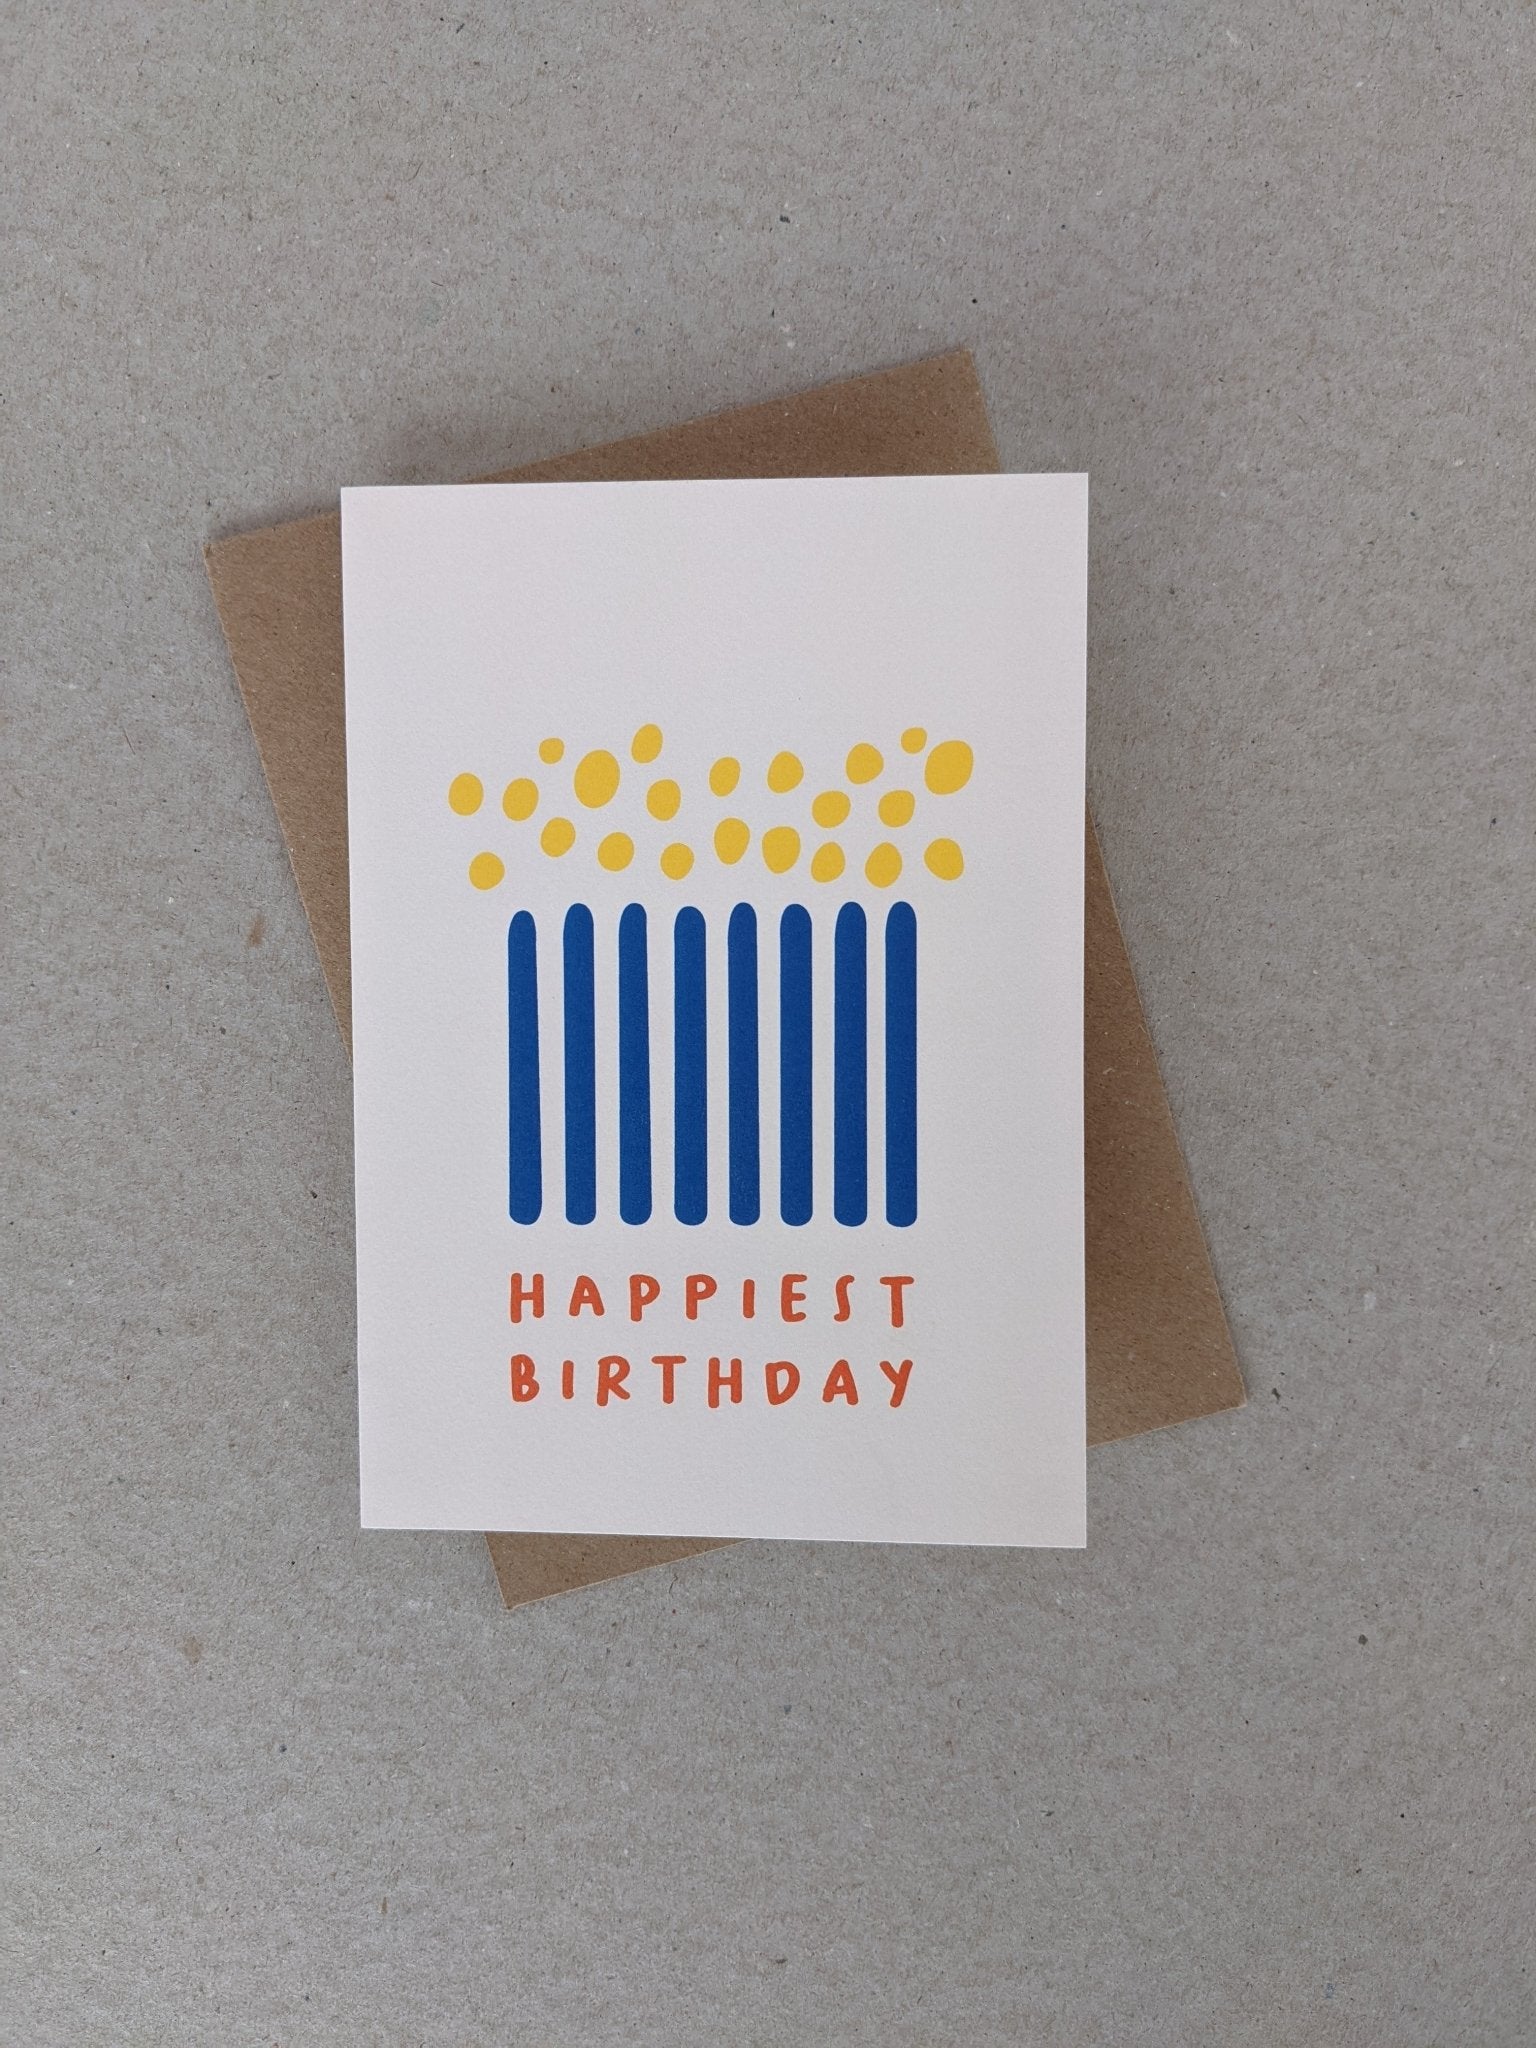 Happiest Birthday Greetings Card - The Stationery Cupboard